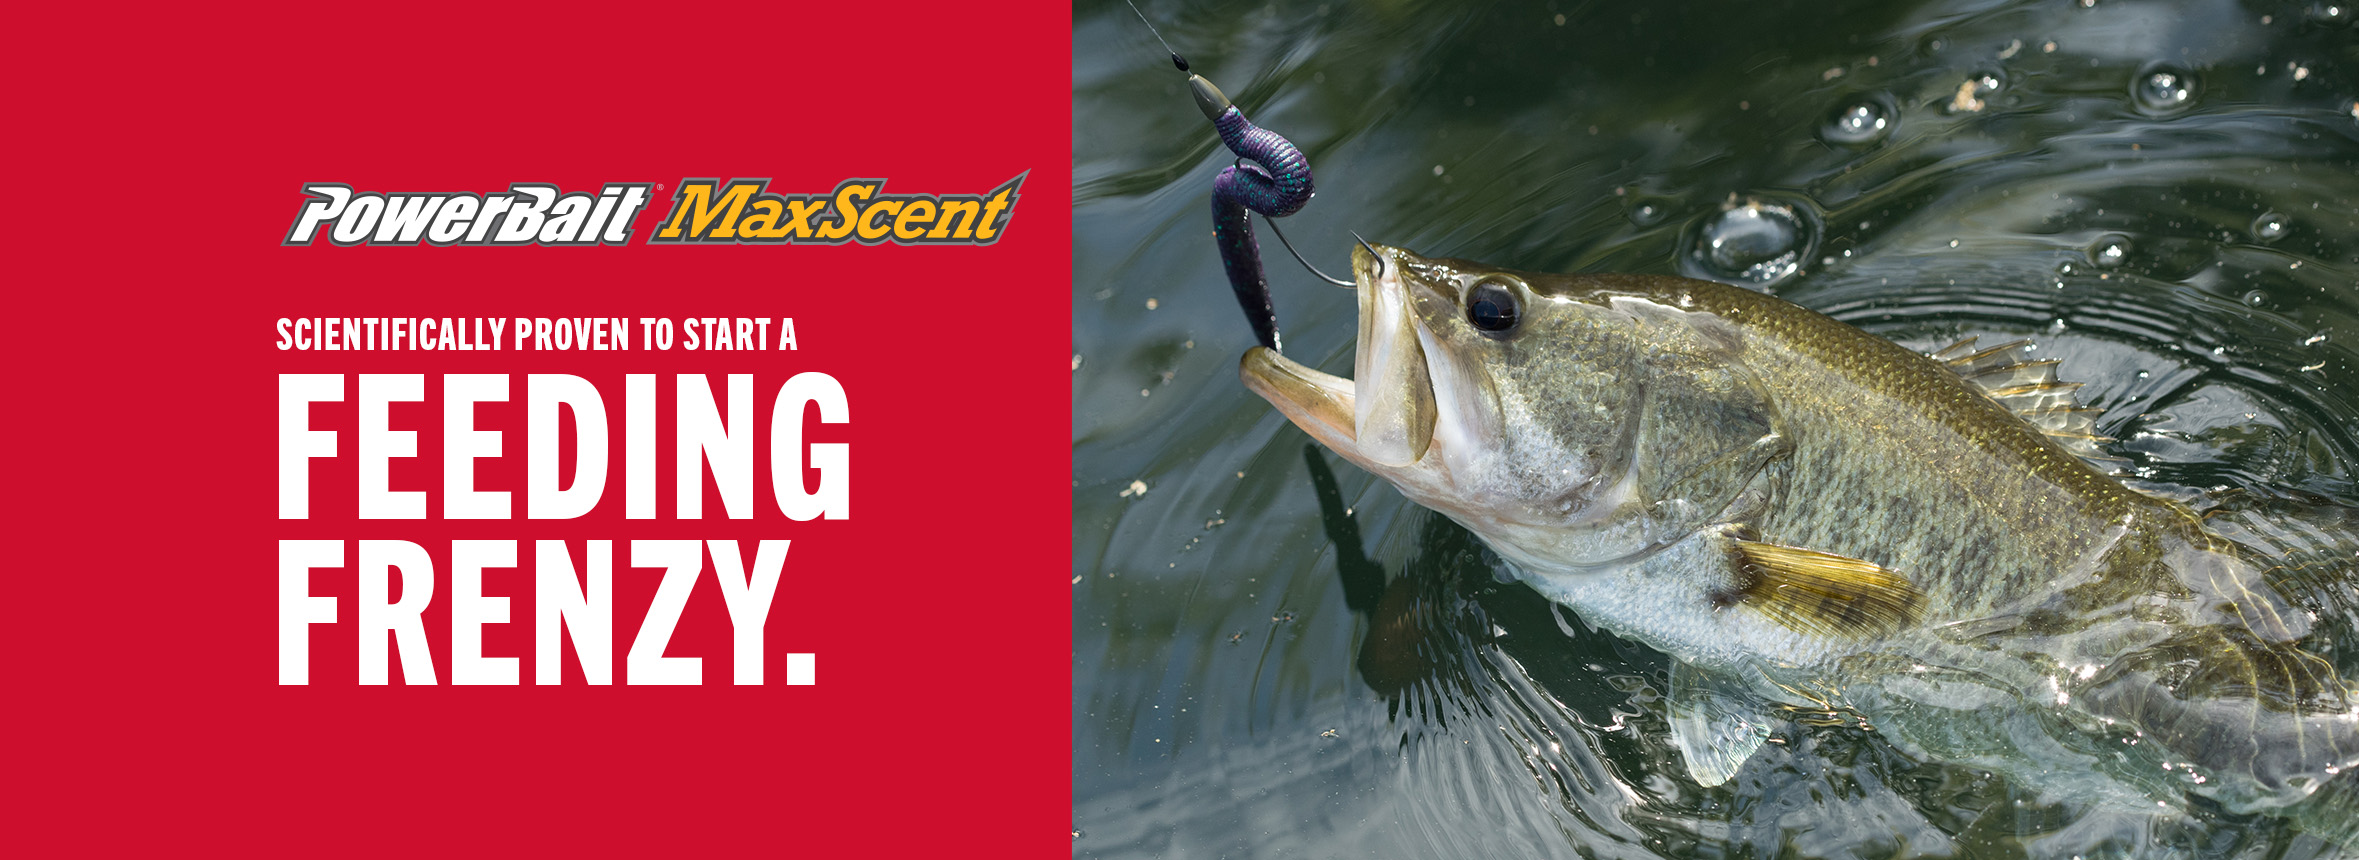 Powerbait Maxscent: Scientifically proven to start a feeding frenzy.